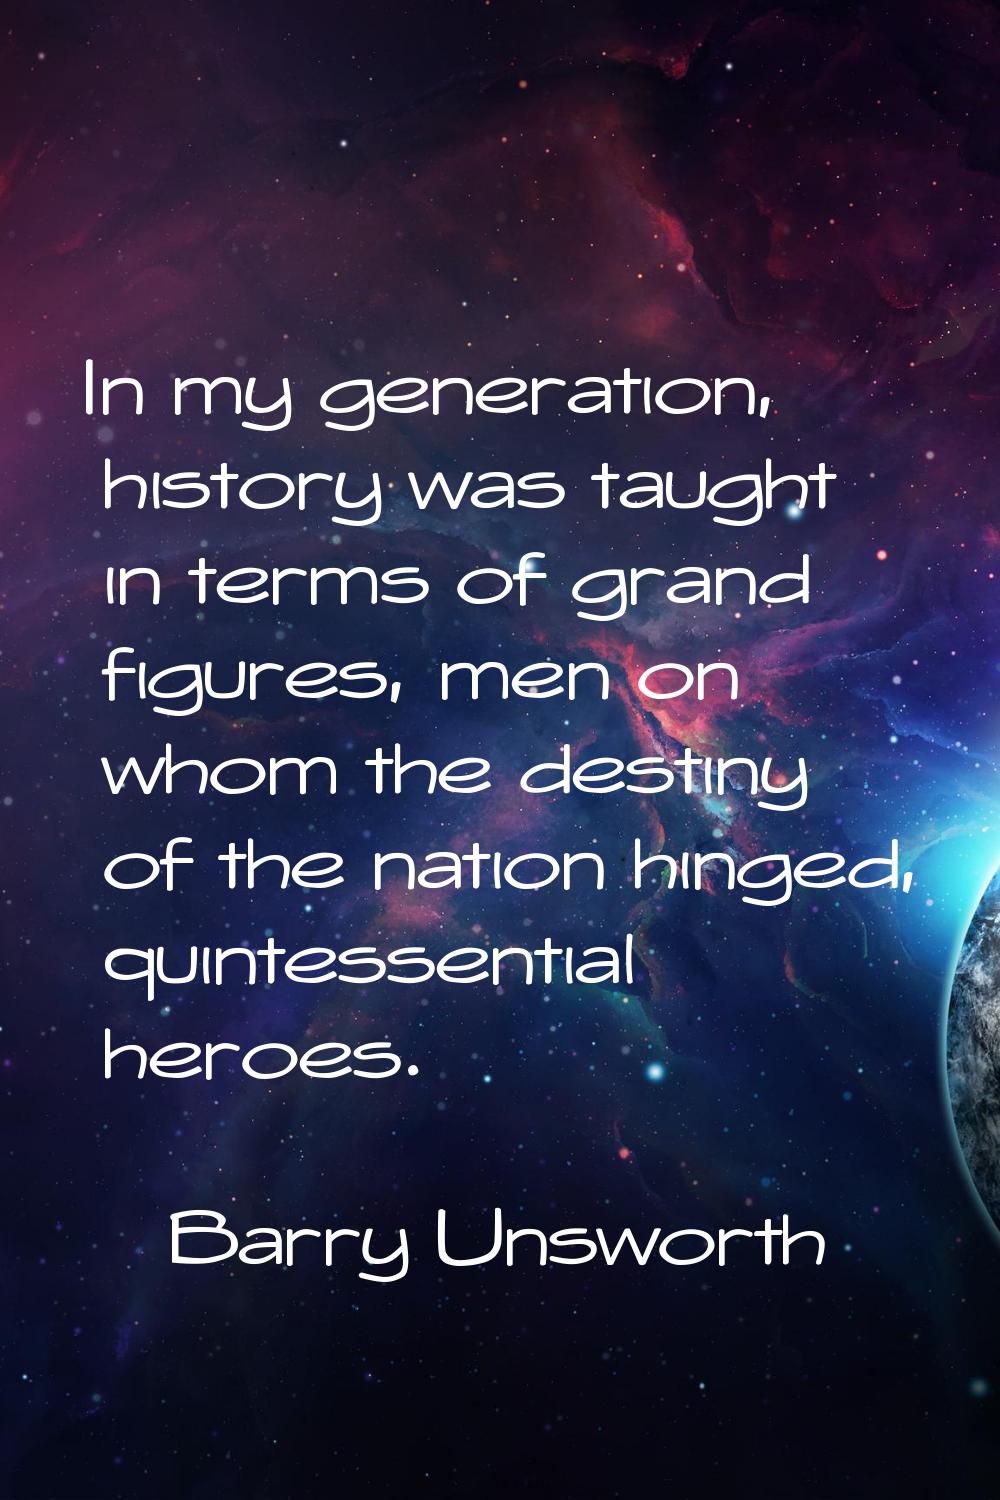 In my generation, history was taught in terms of grand figures, men on whom the destiny of the nati